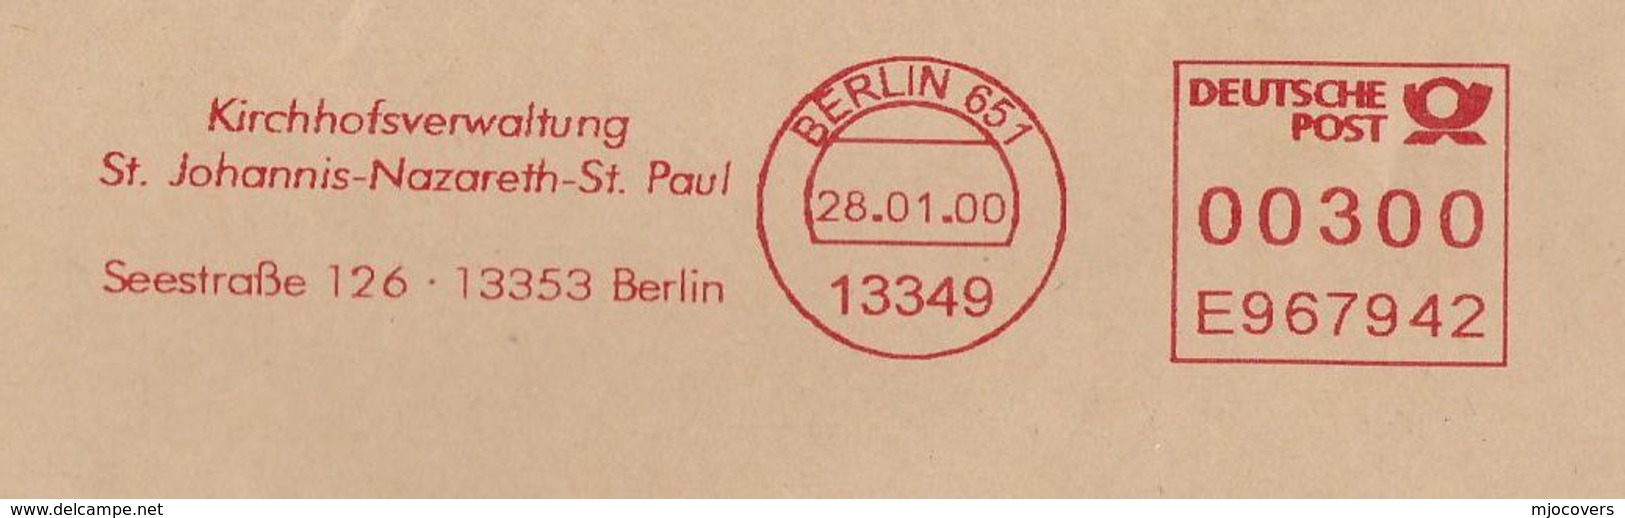 2000 COVER Berlin ST JOHNNIS NAZARETH ST PAUL CEMETERY Administration METER SLOGAN Stamps Religion Germany - Christianity